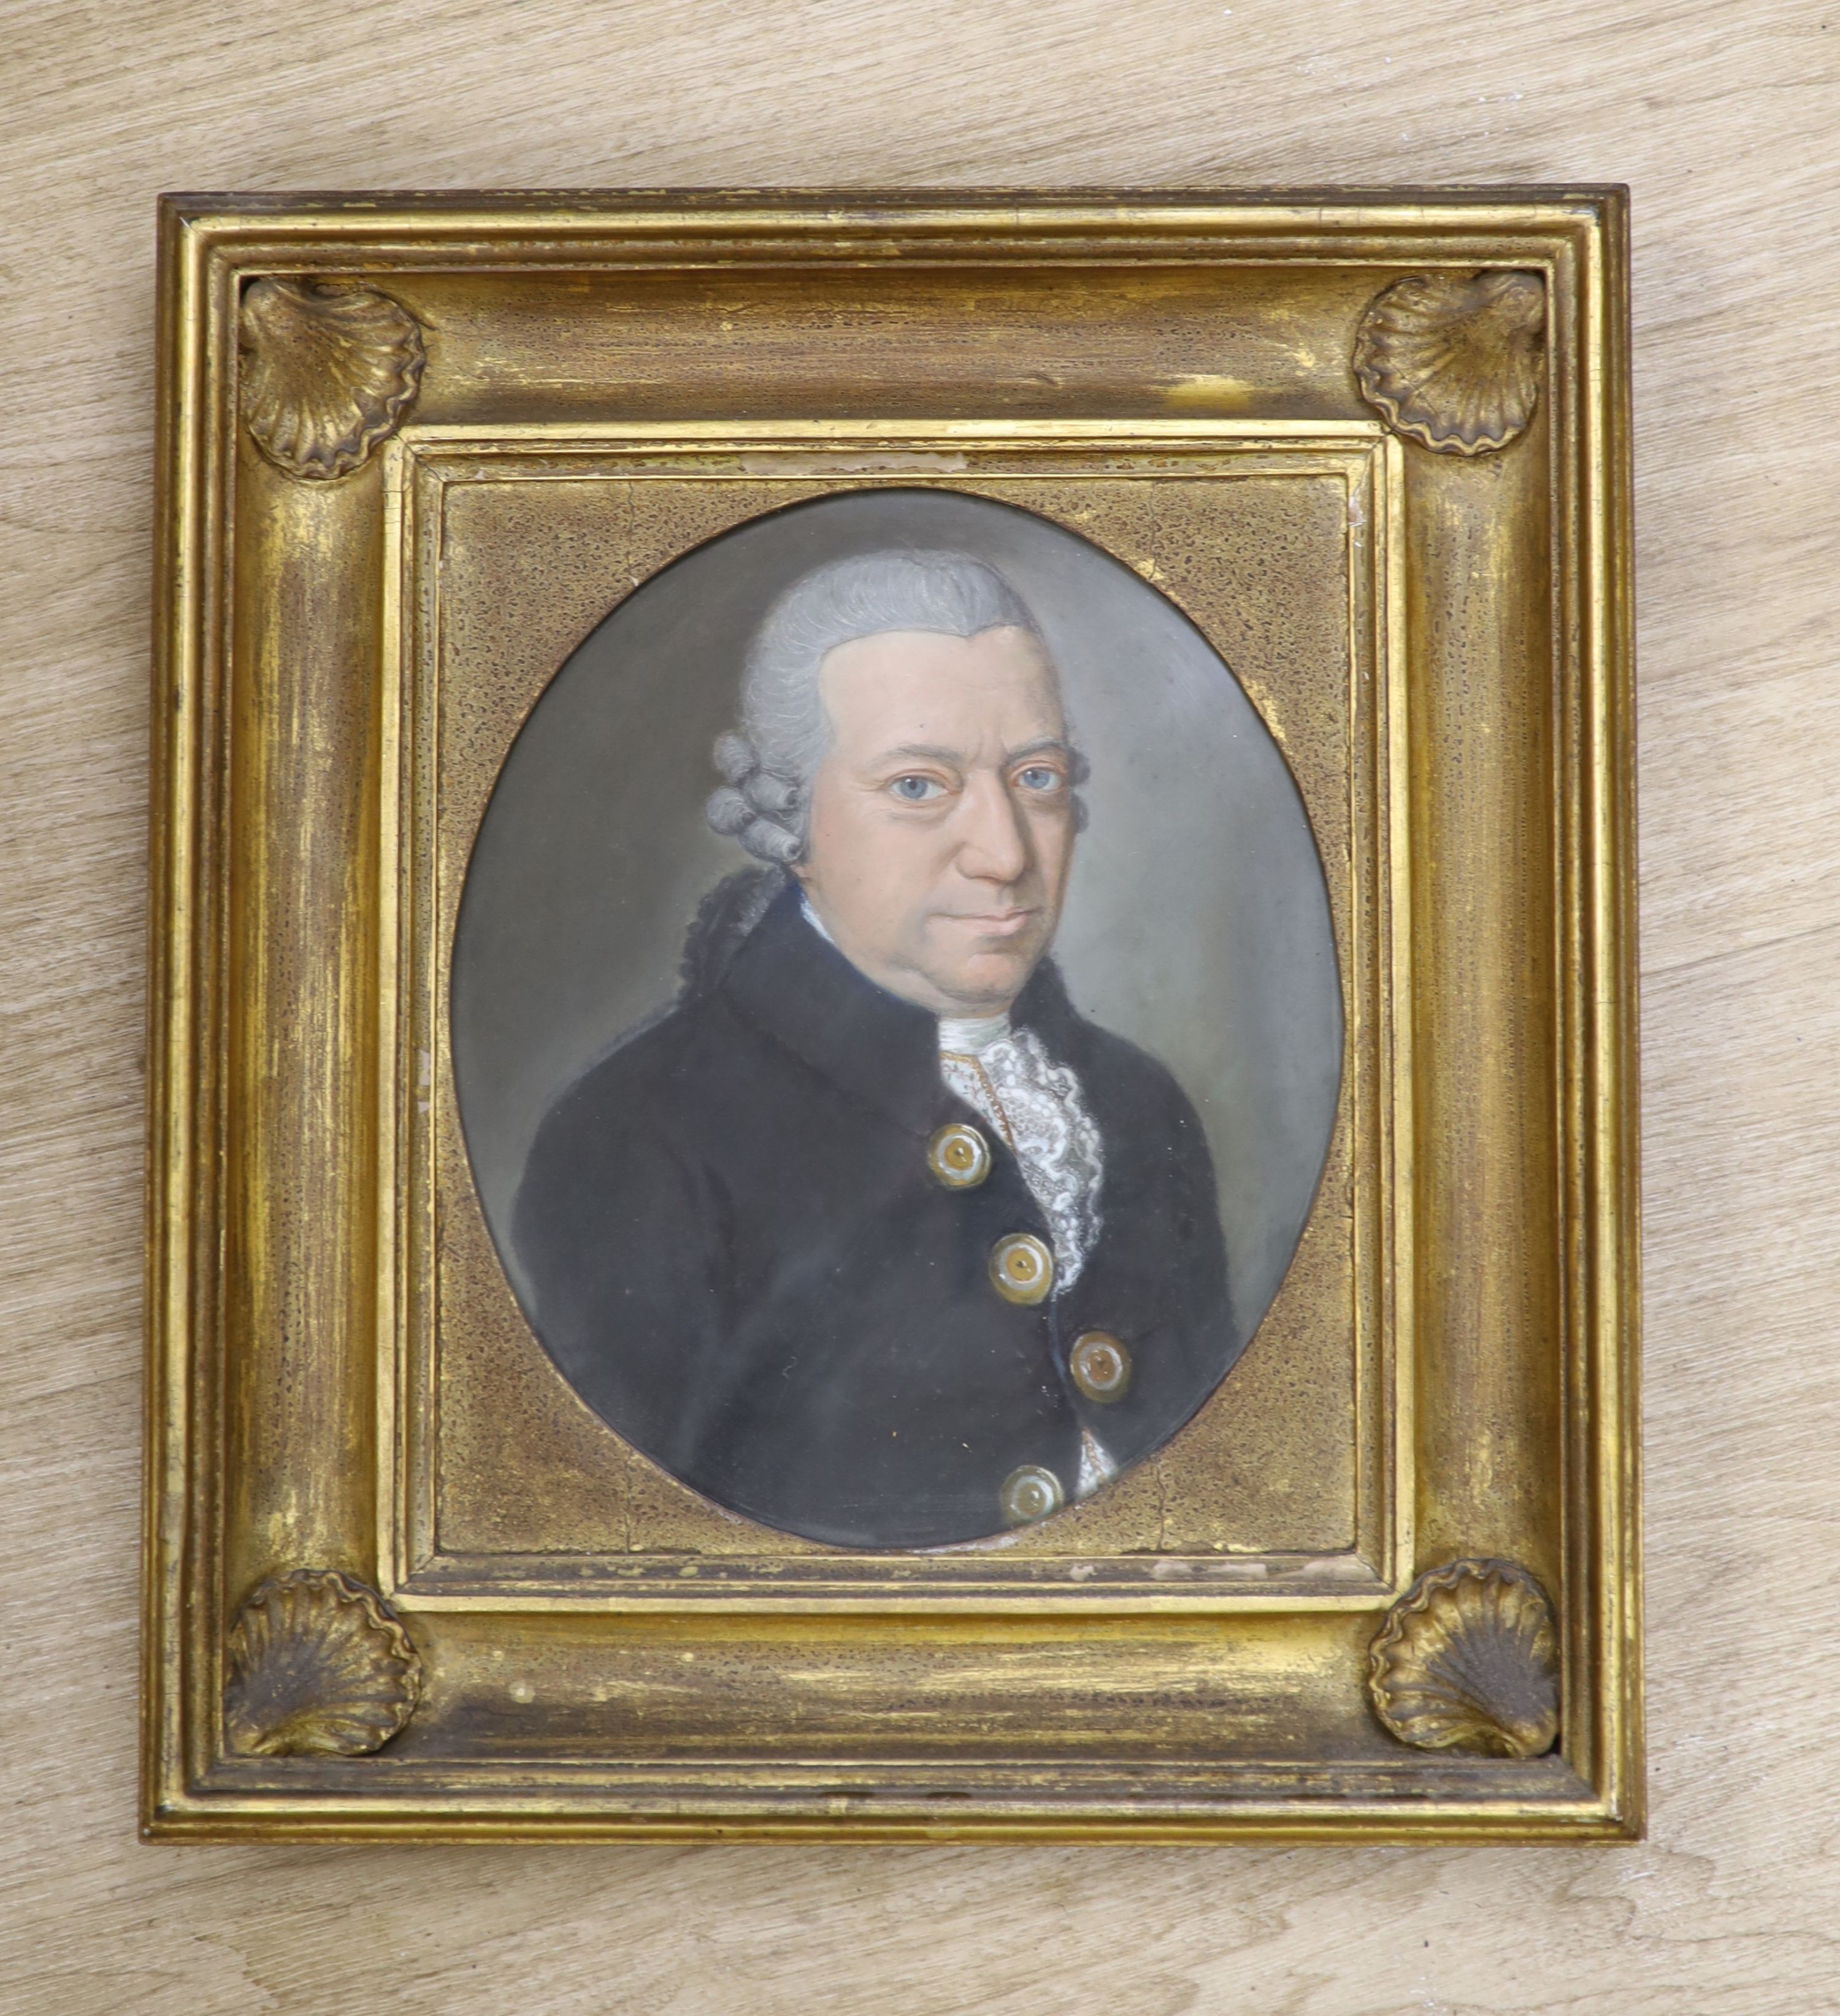 Late 18th century English School, pastel on paper, Portrait of a gentleman, oval, 30 x 25cm